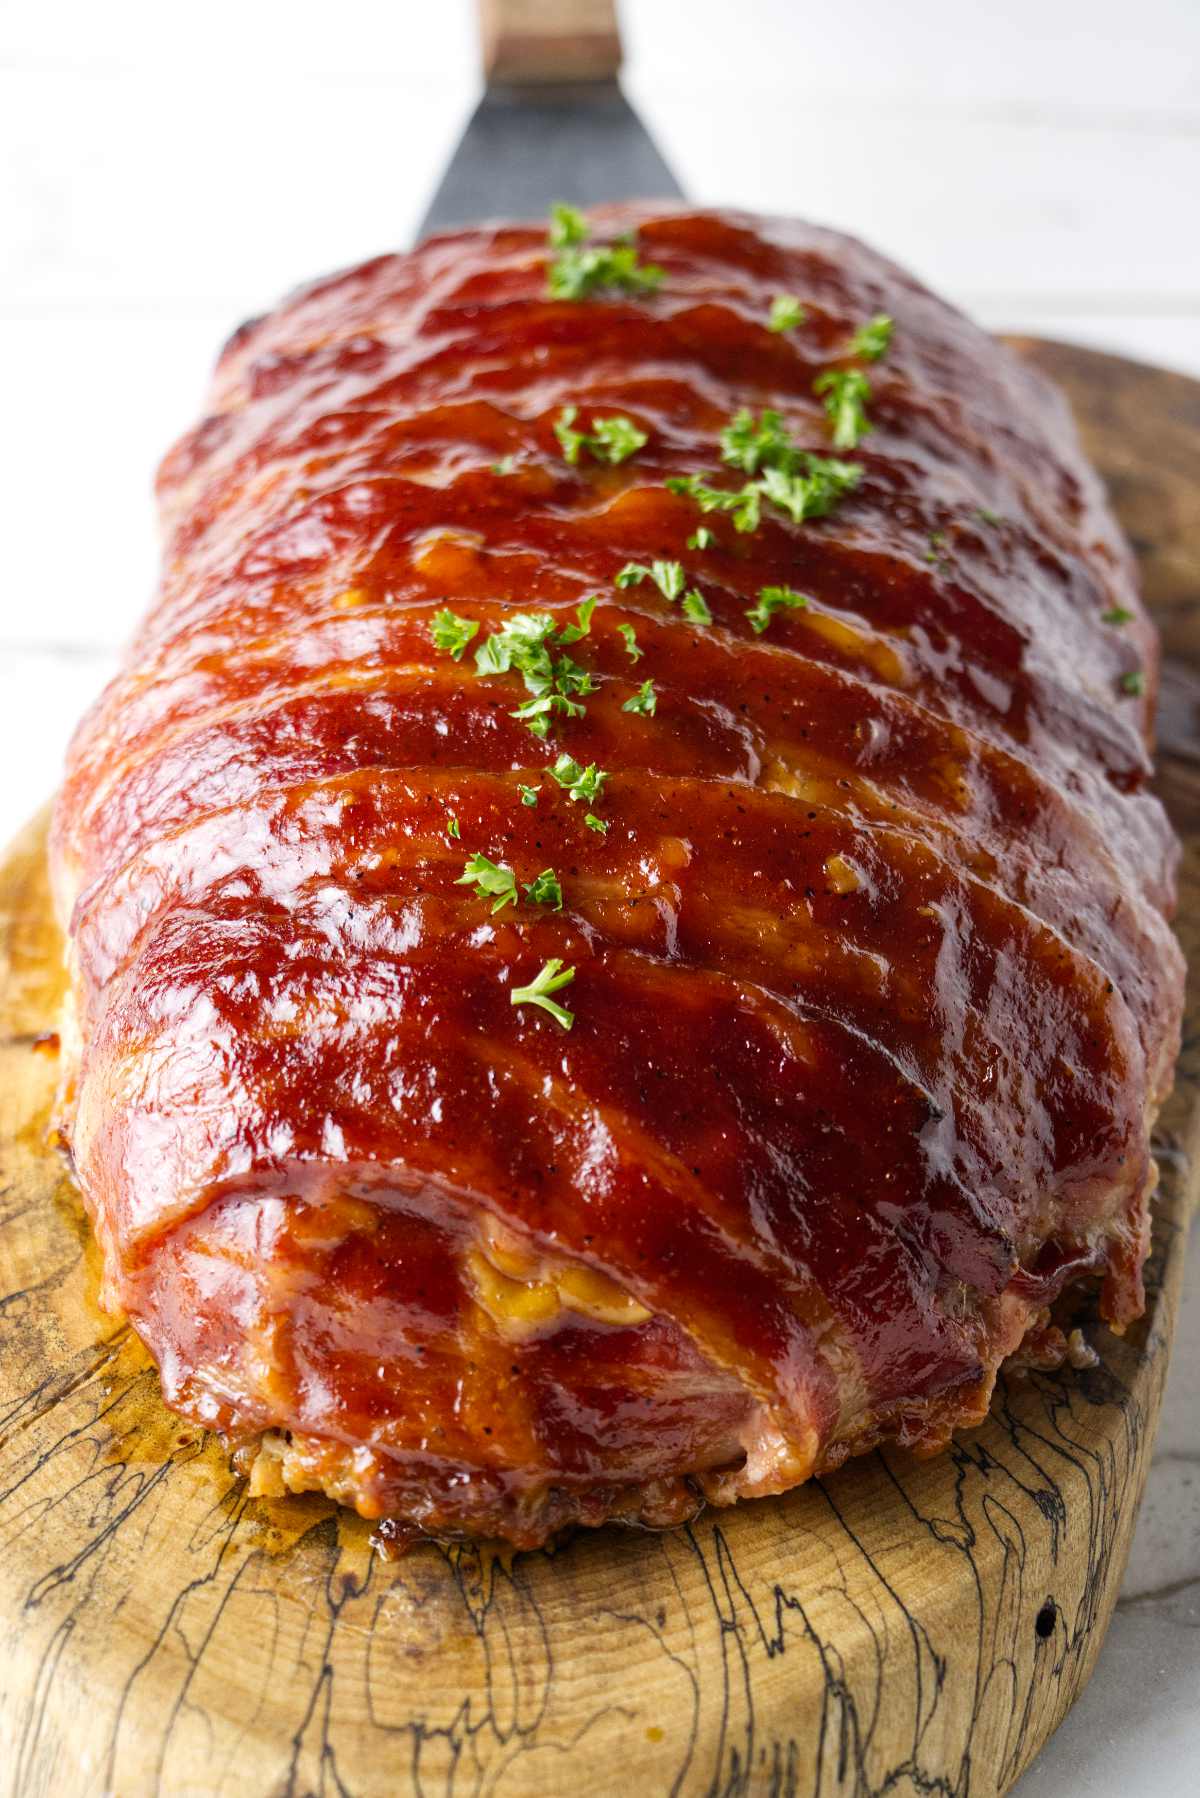 Bacon wrapped smoked meatloaf on a wood cutting board